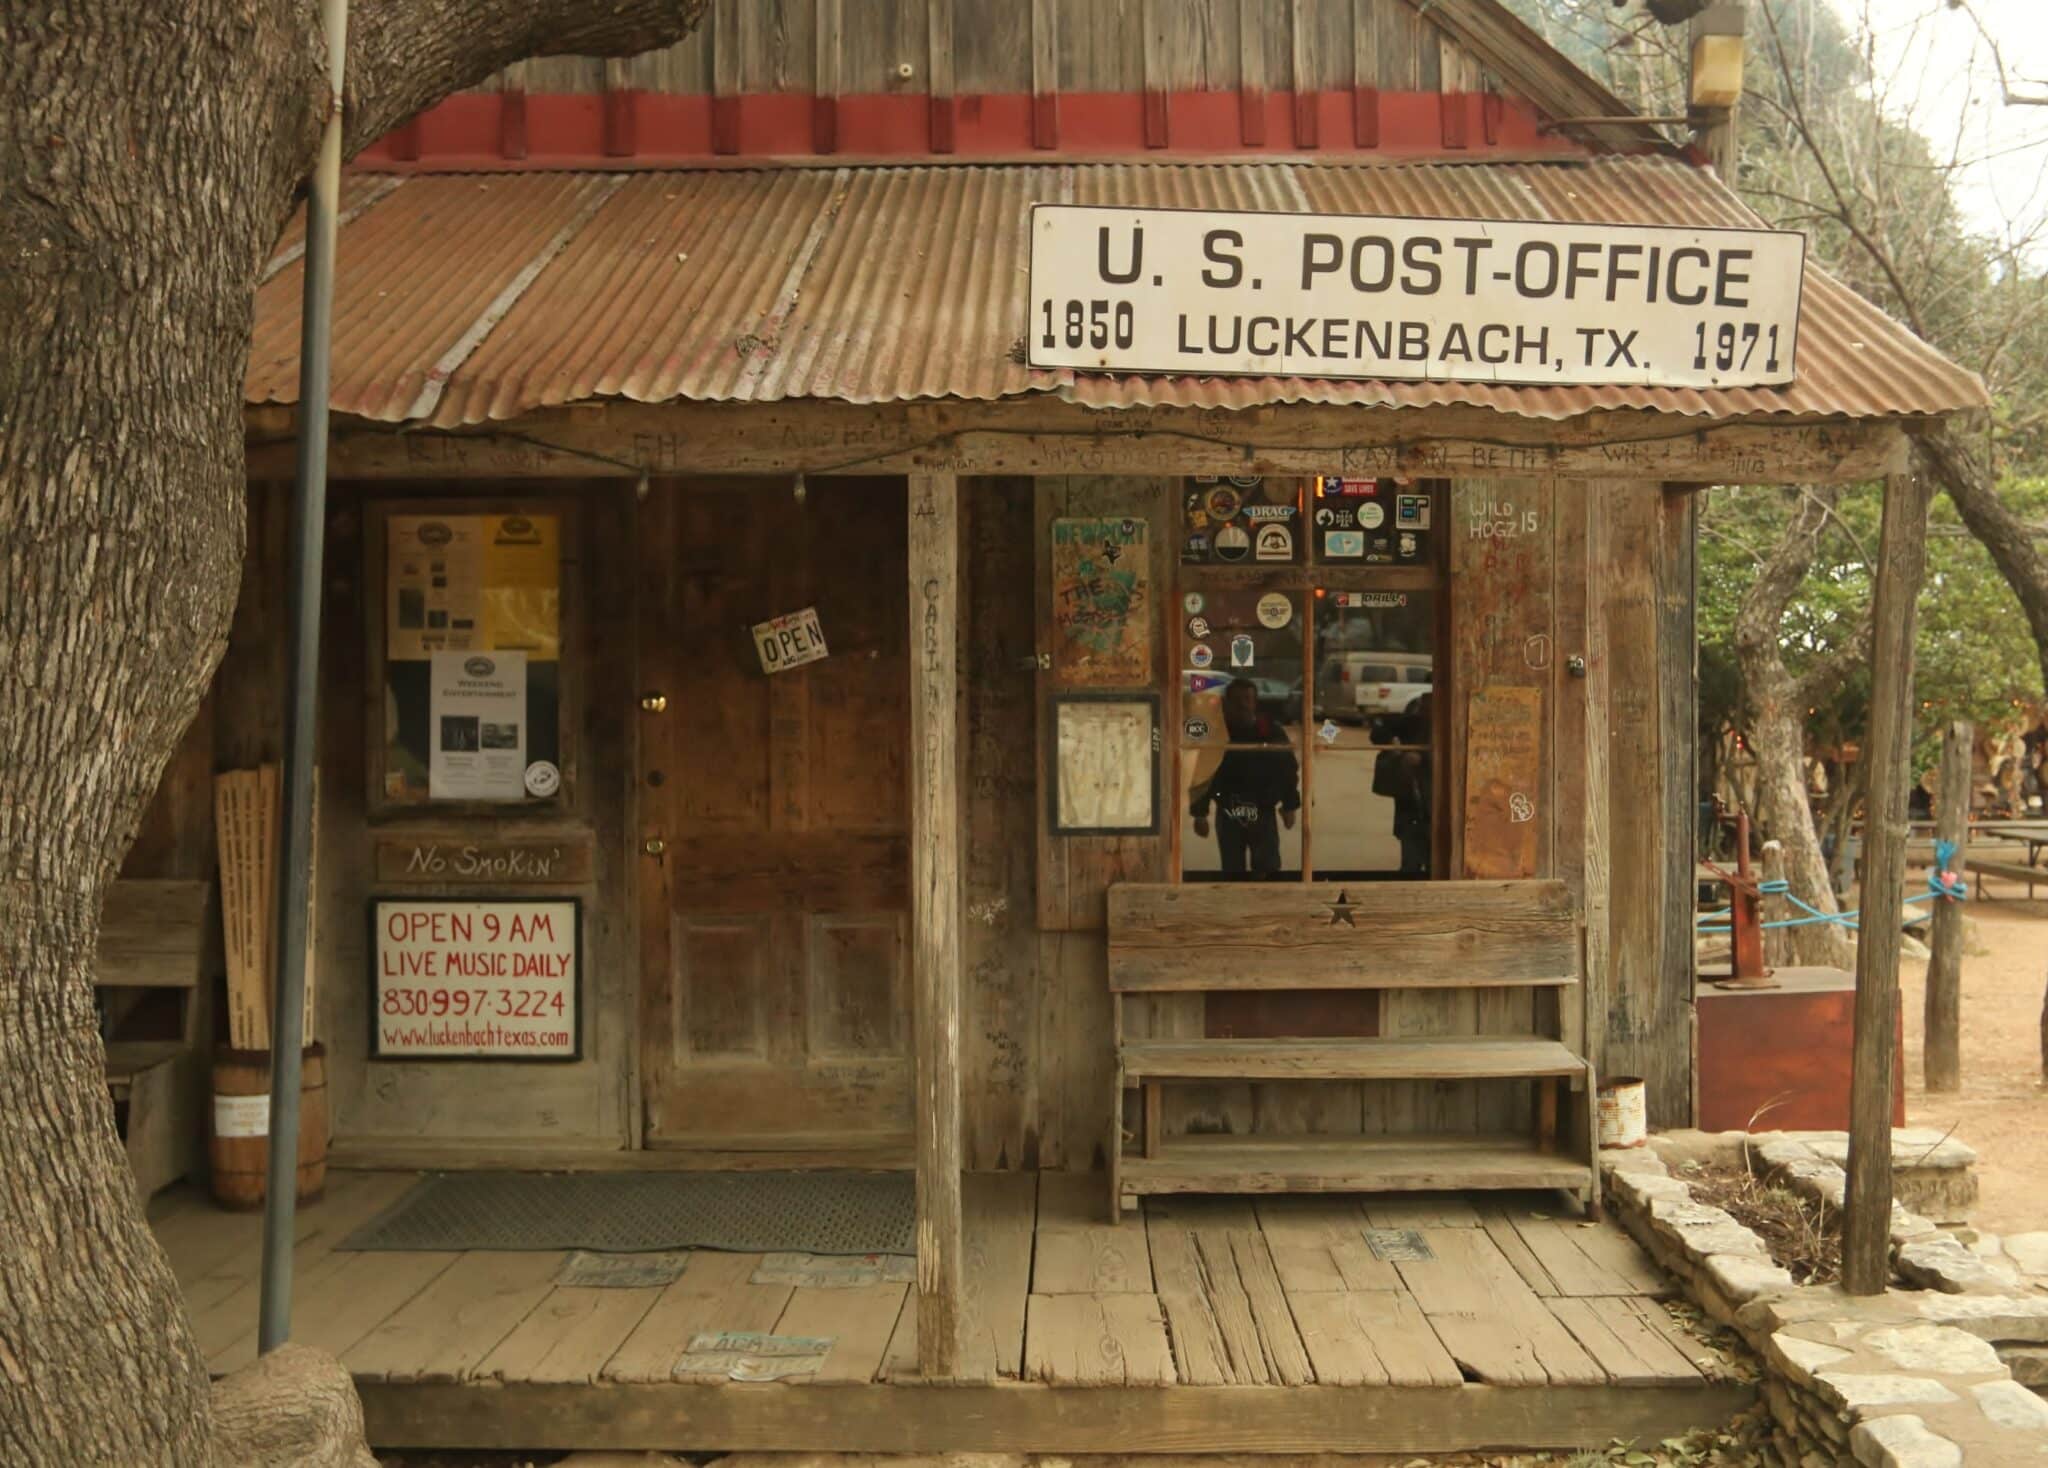 Post office and general store in Luckenbach, Texas